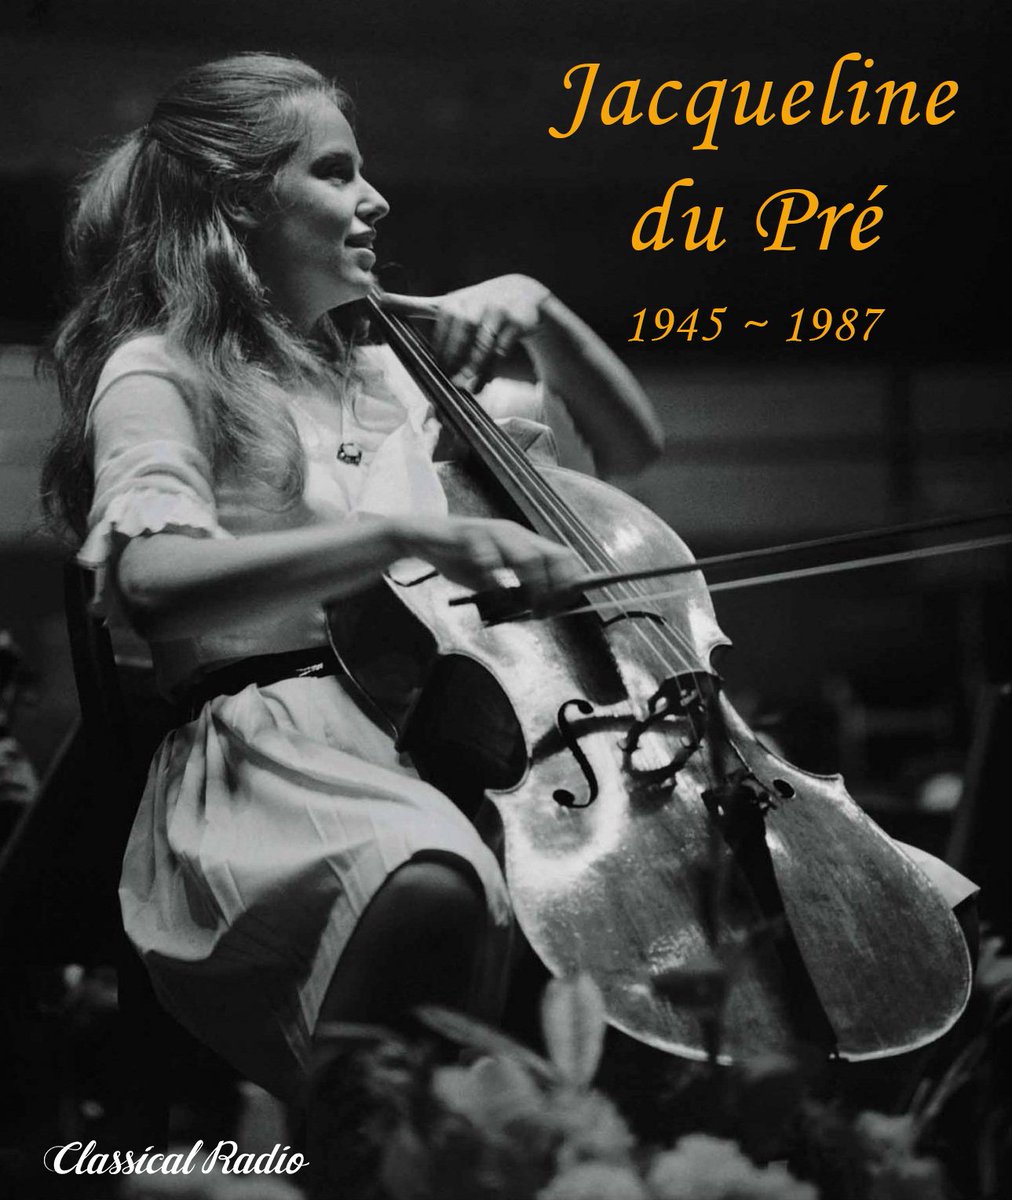 Remembering the great cellist #JacquelineDuPré (1945-1987) on what would have been her 78th birthday. You’ll find her wonderful performances on several of our channels:
ClassicalRadio.com/celloworks
ClassicalRadio.com/stringworks
ClassicalRadio.com/adagios

•

#CelloWorks #CelloMusic #Cello